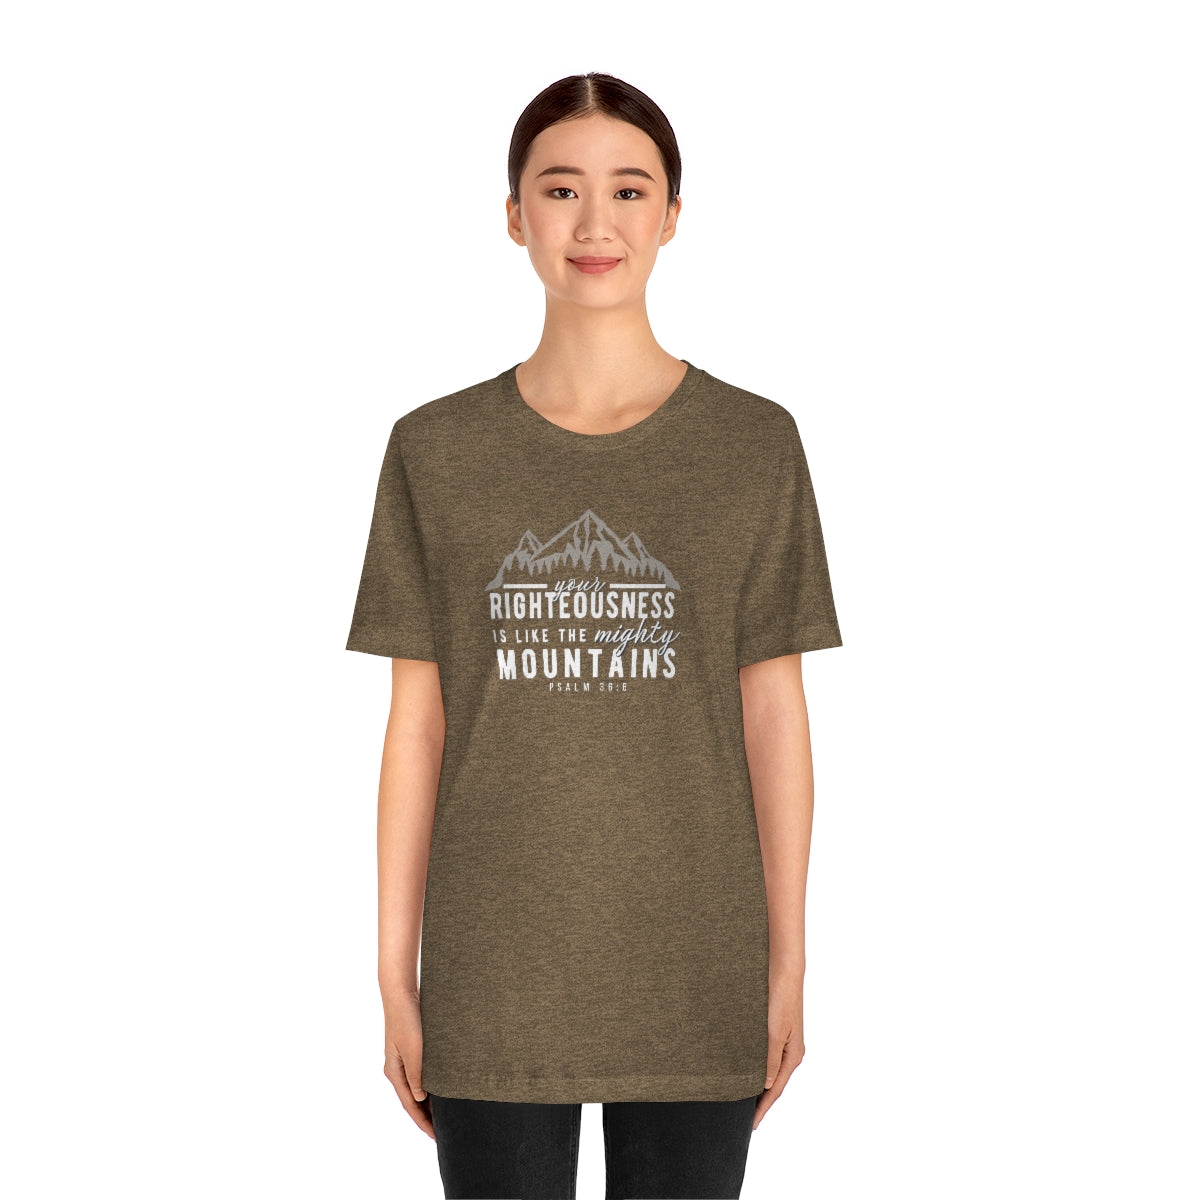 Your Righteousness is Like the Mighty Mountains -Unisex Jersey Short Sleeve Tee